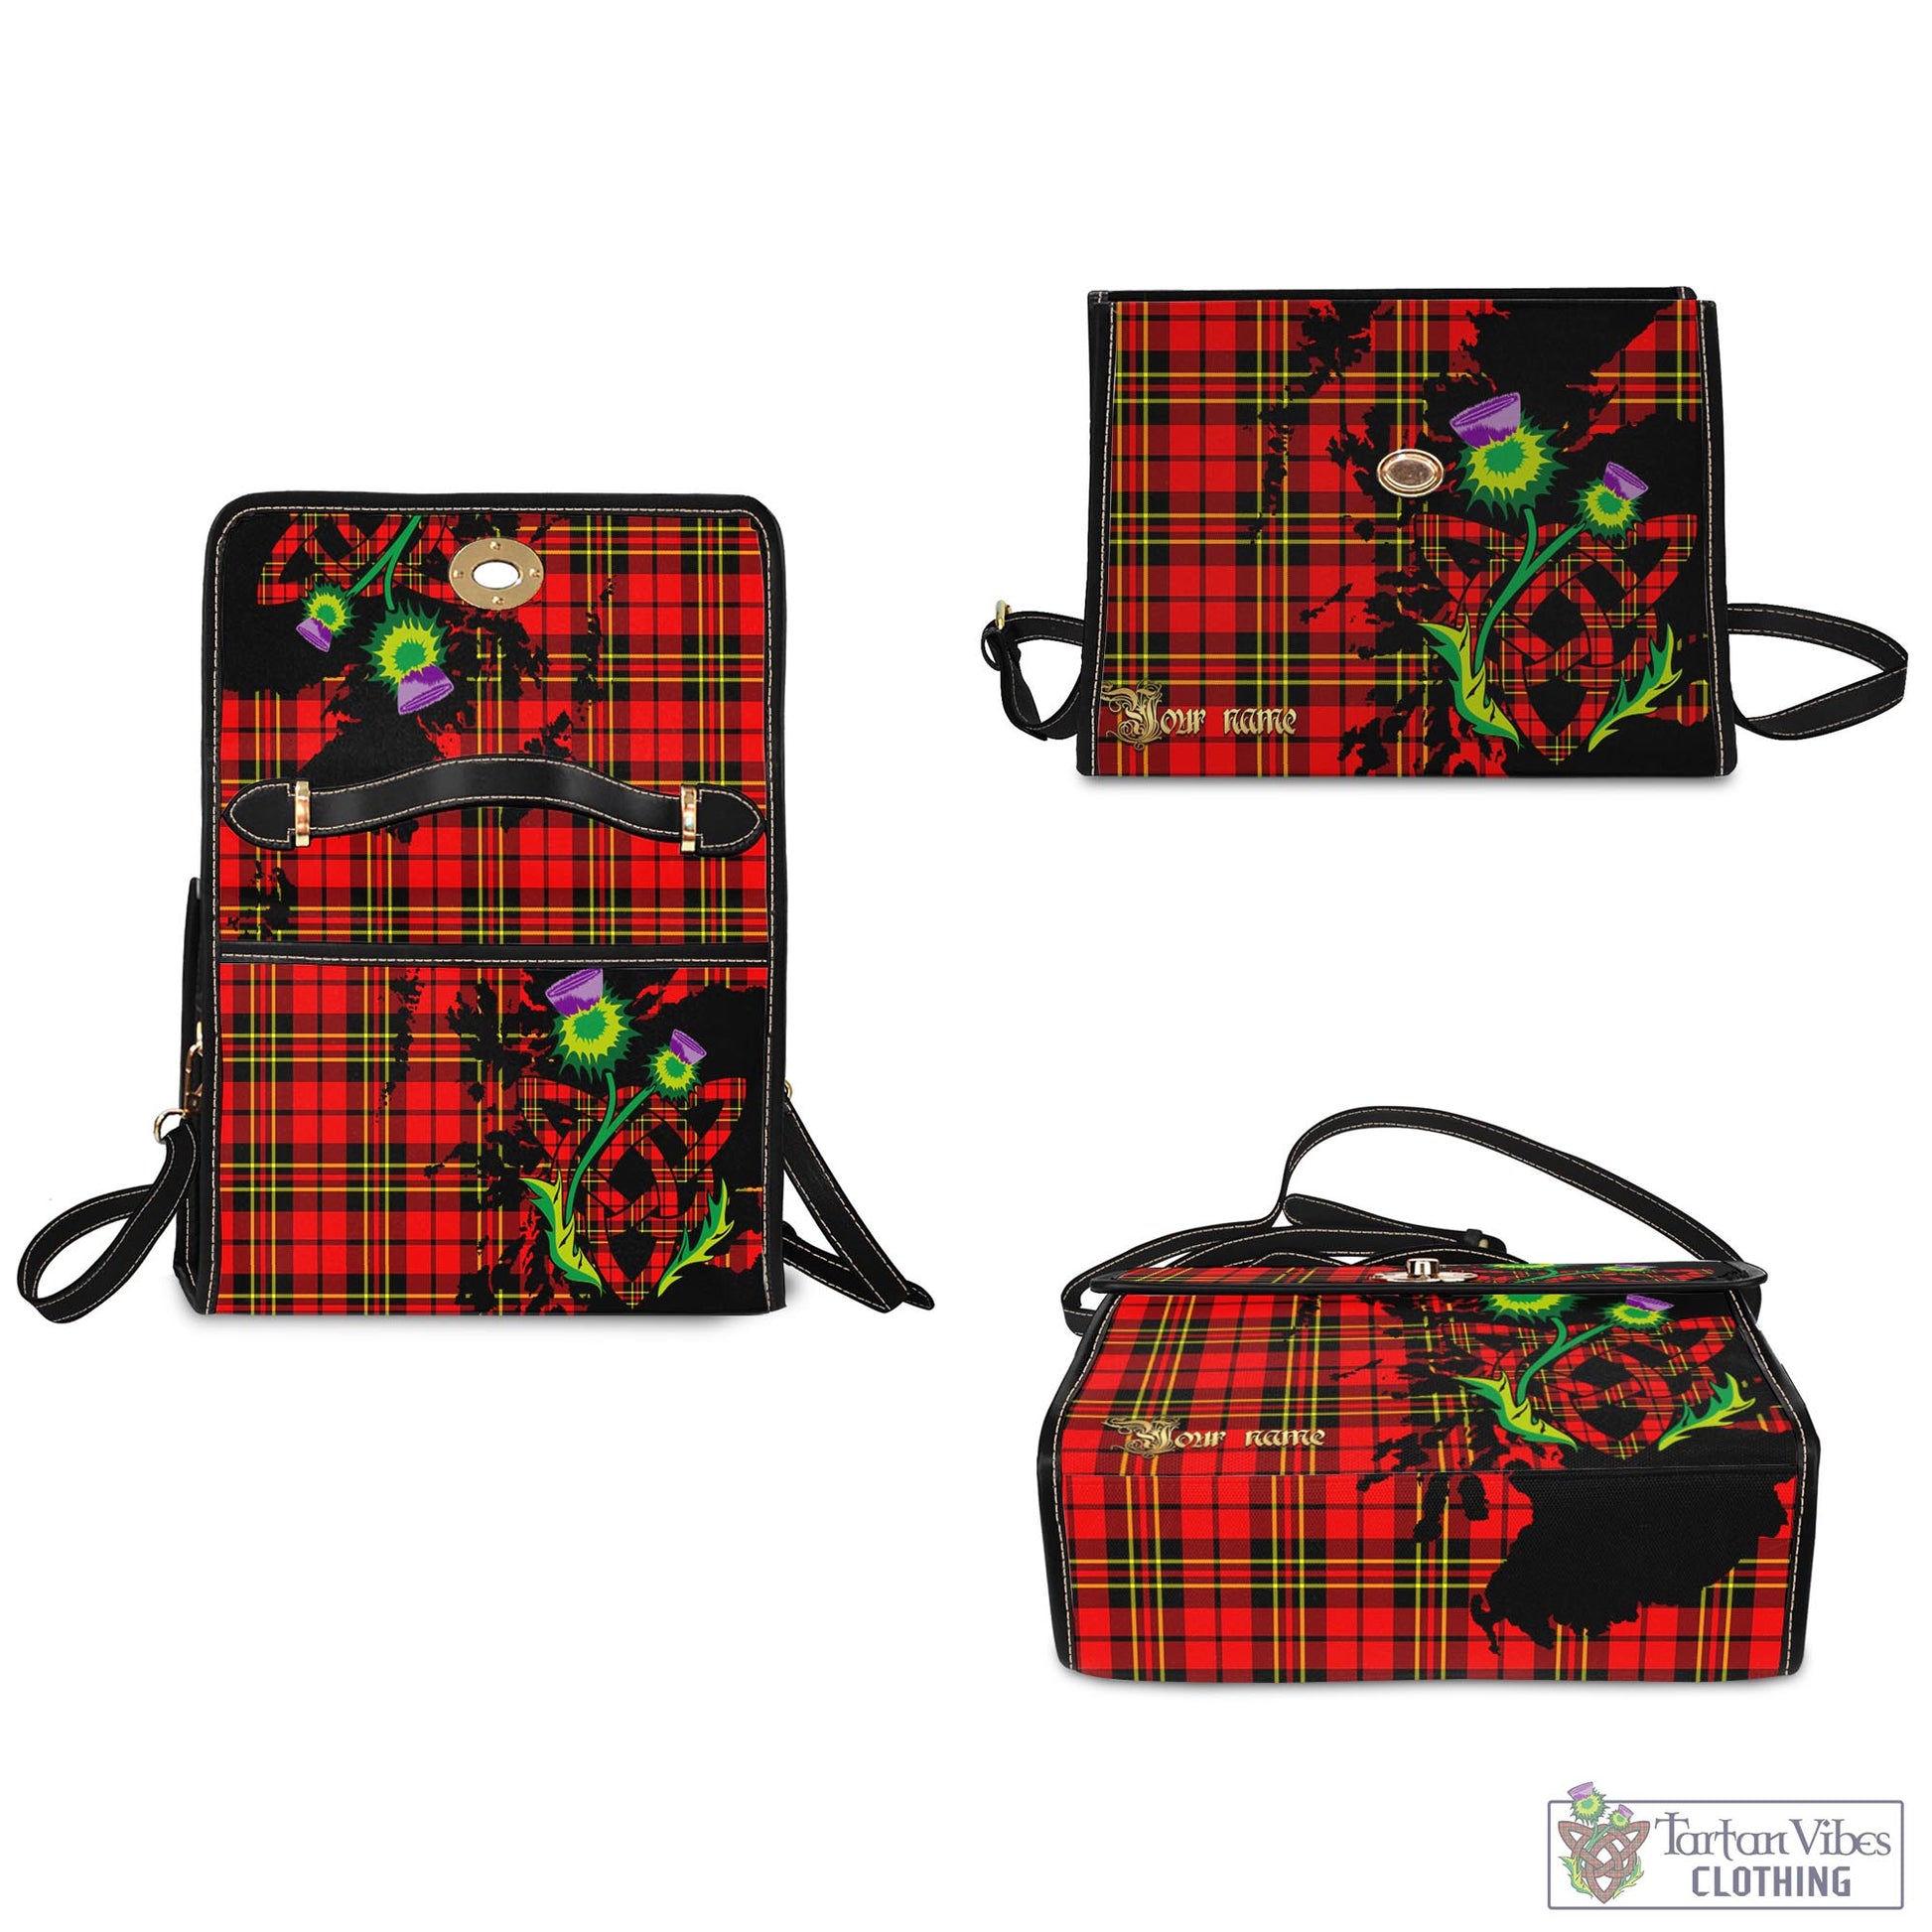 Tartan Vibes Clothing Brodie Modern Tartan Waterproof Canvas Bag with Scotland Map and Thistle Celtic Accents